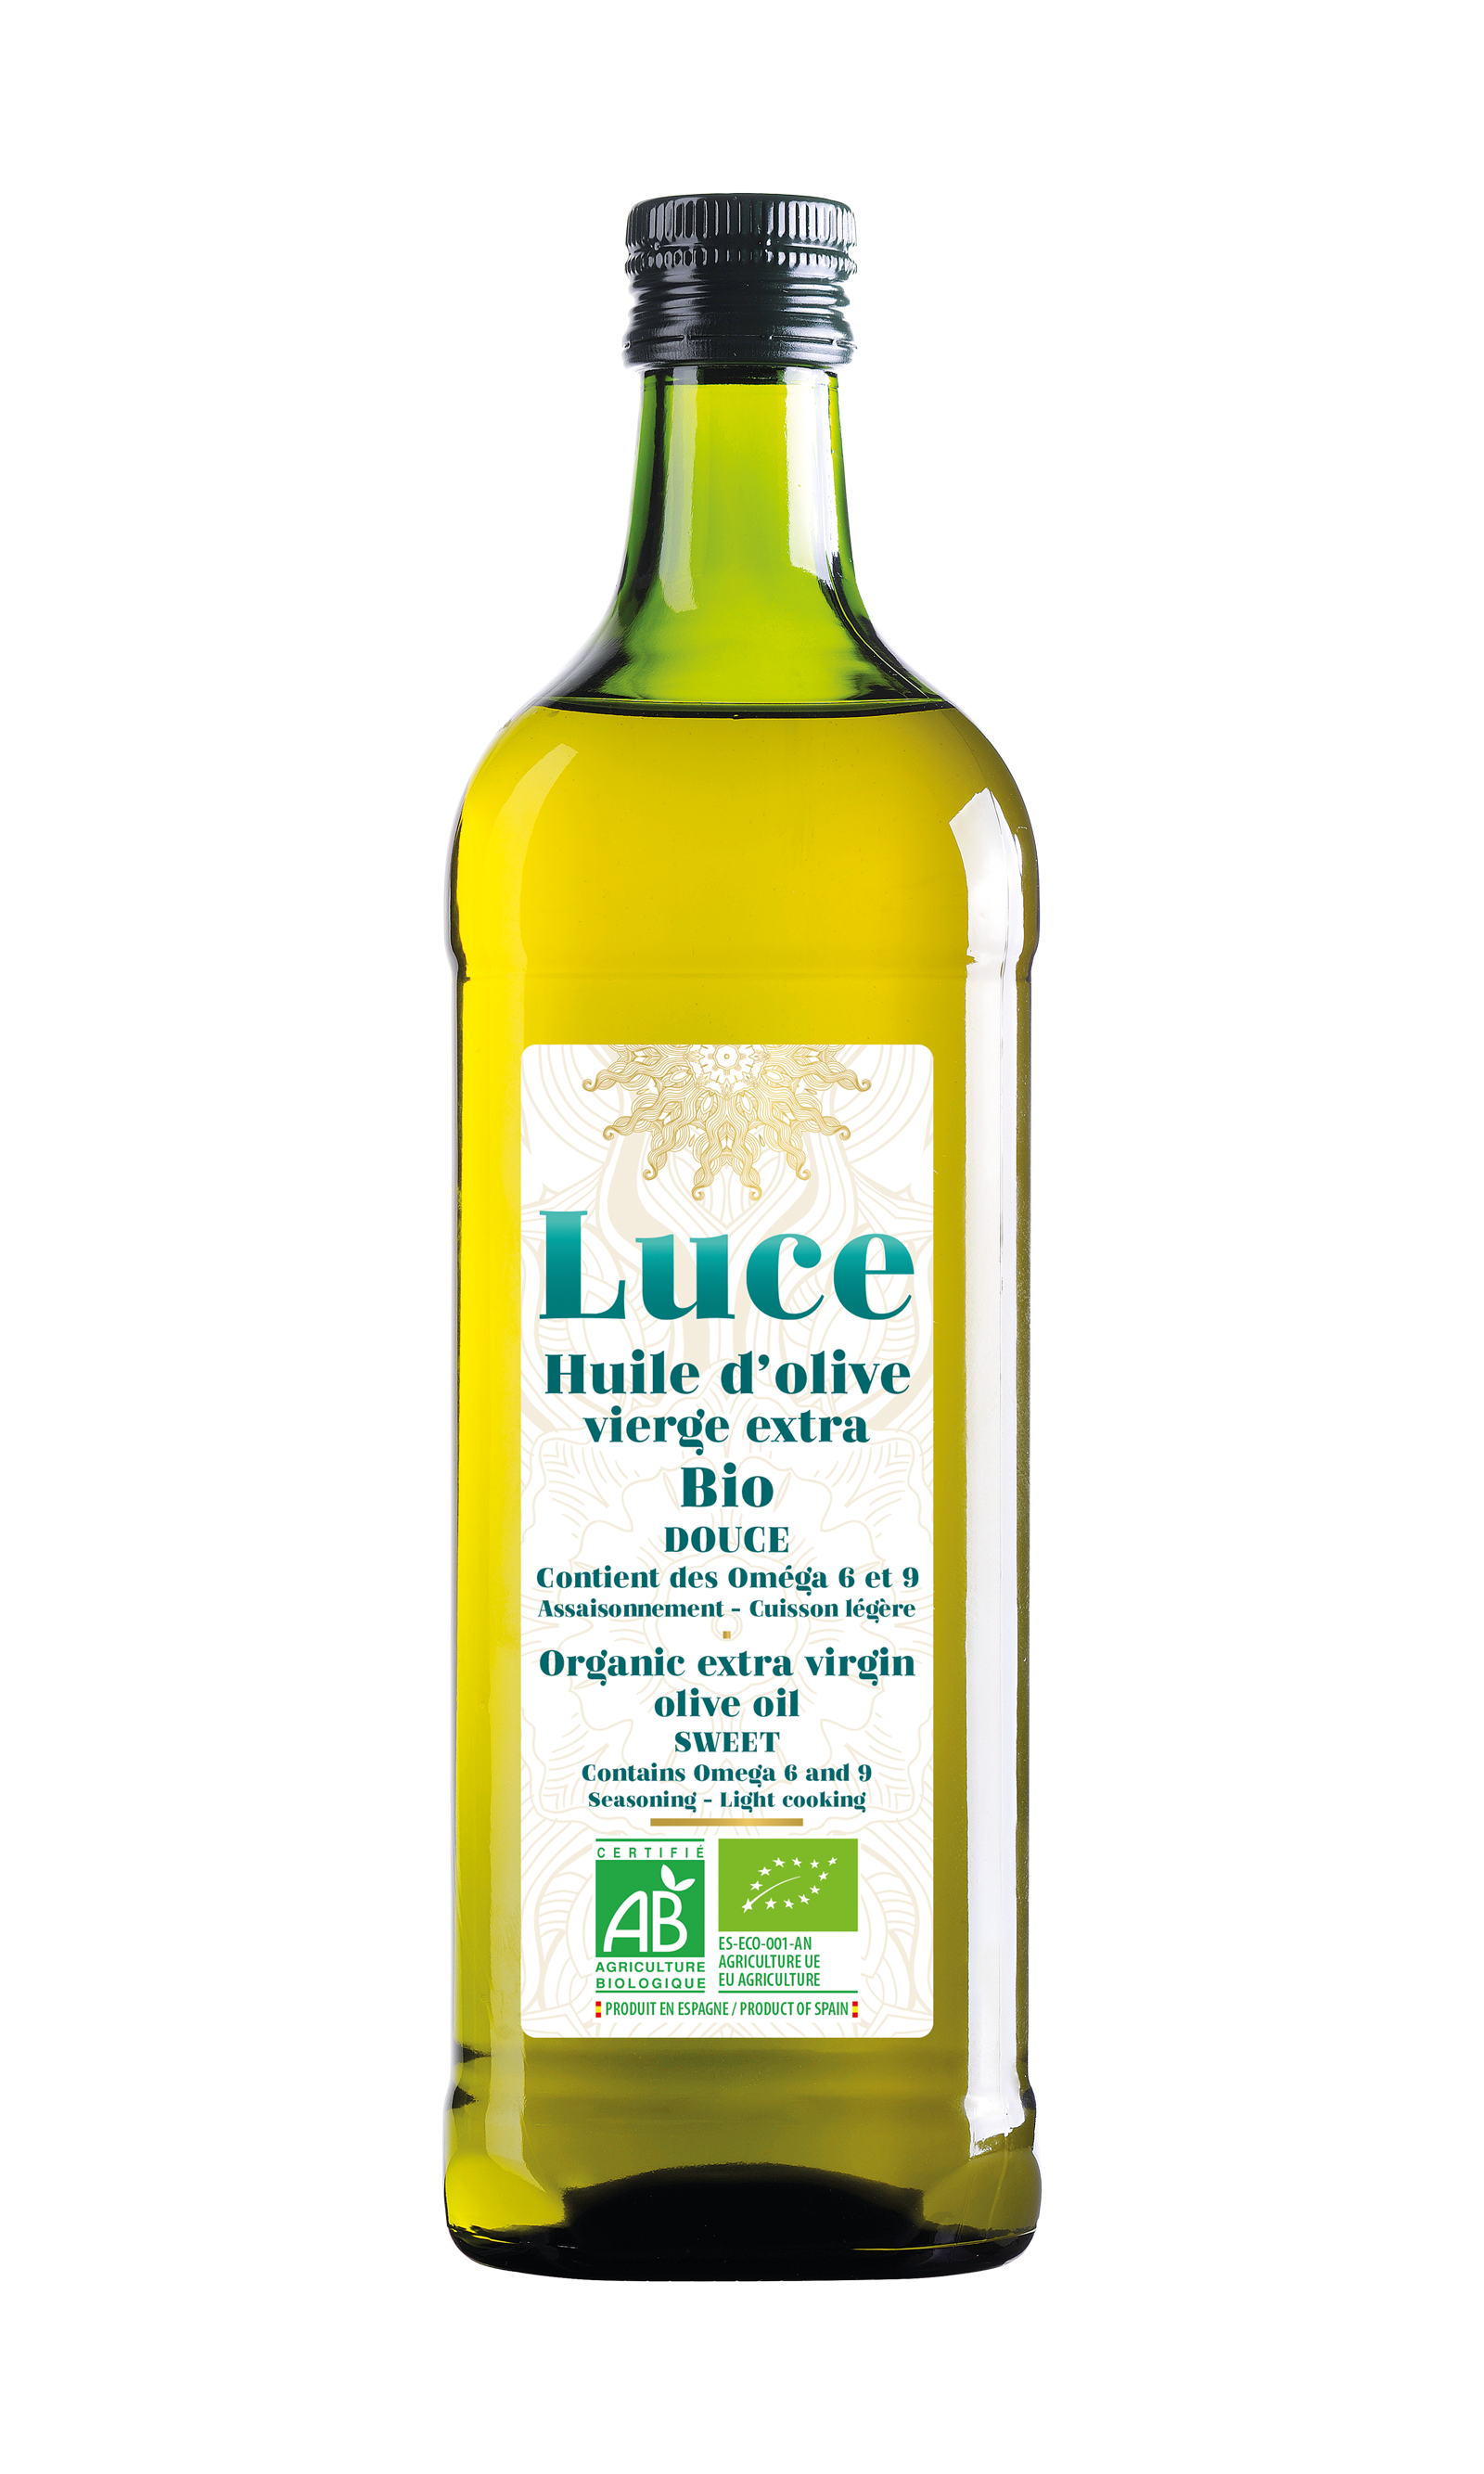 Huile d' olive vierge d'extra bio - Luce